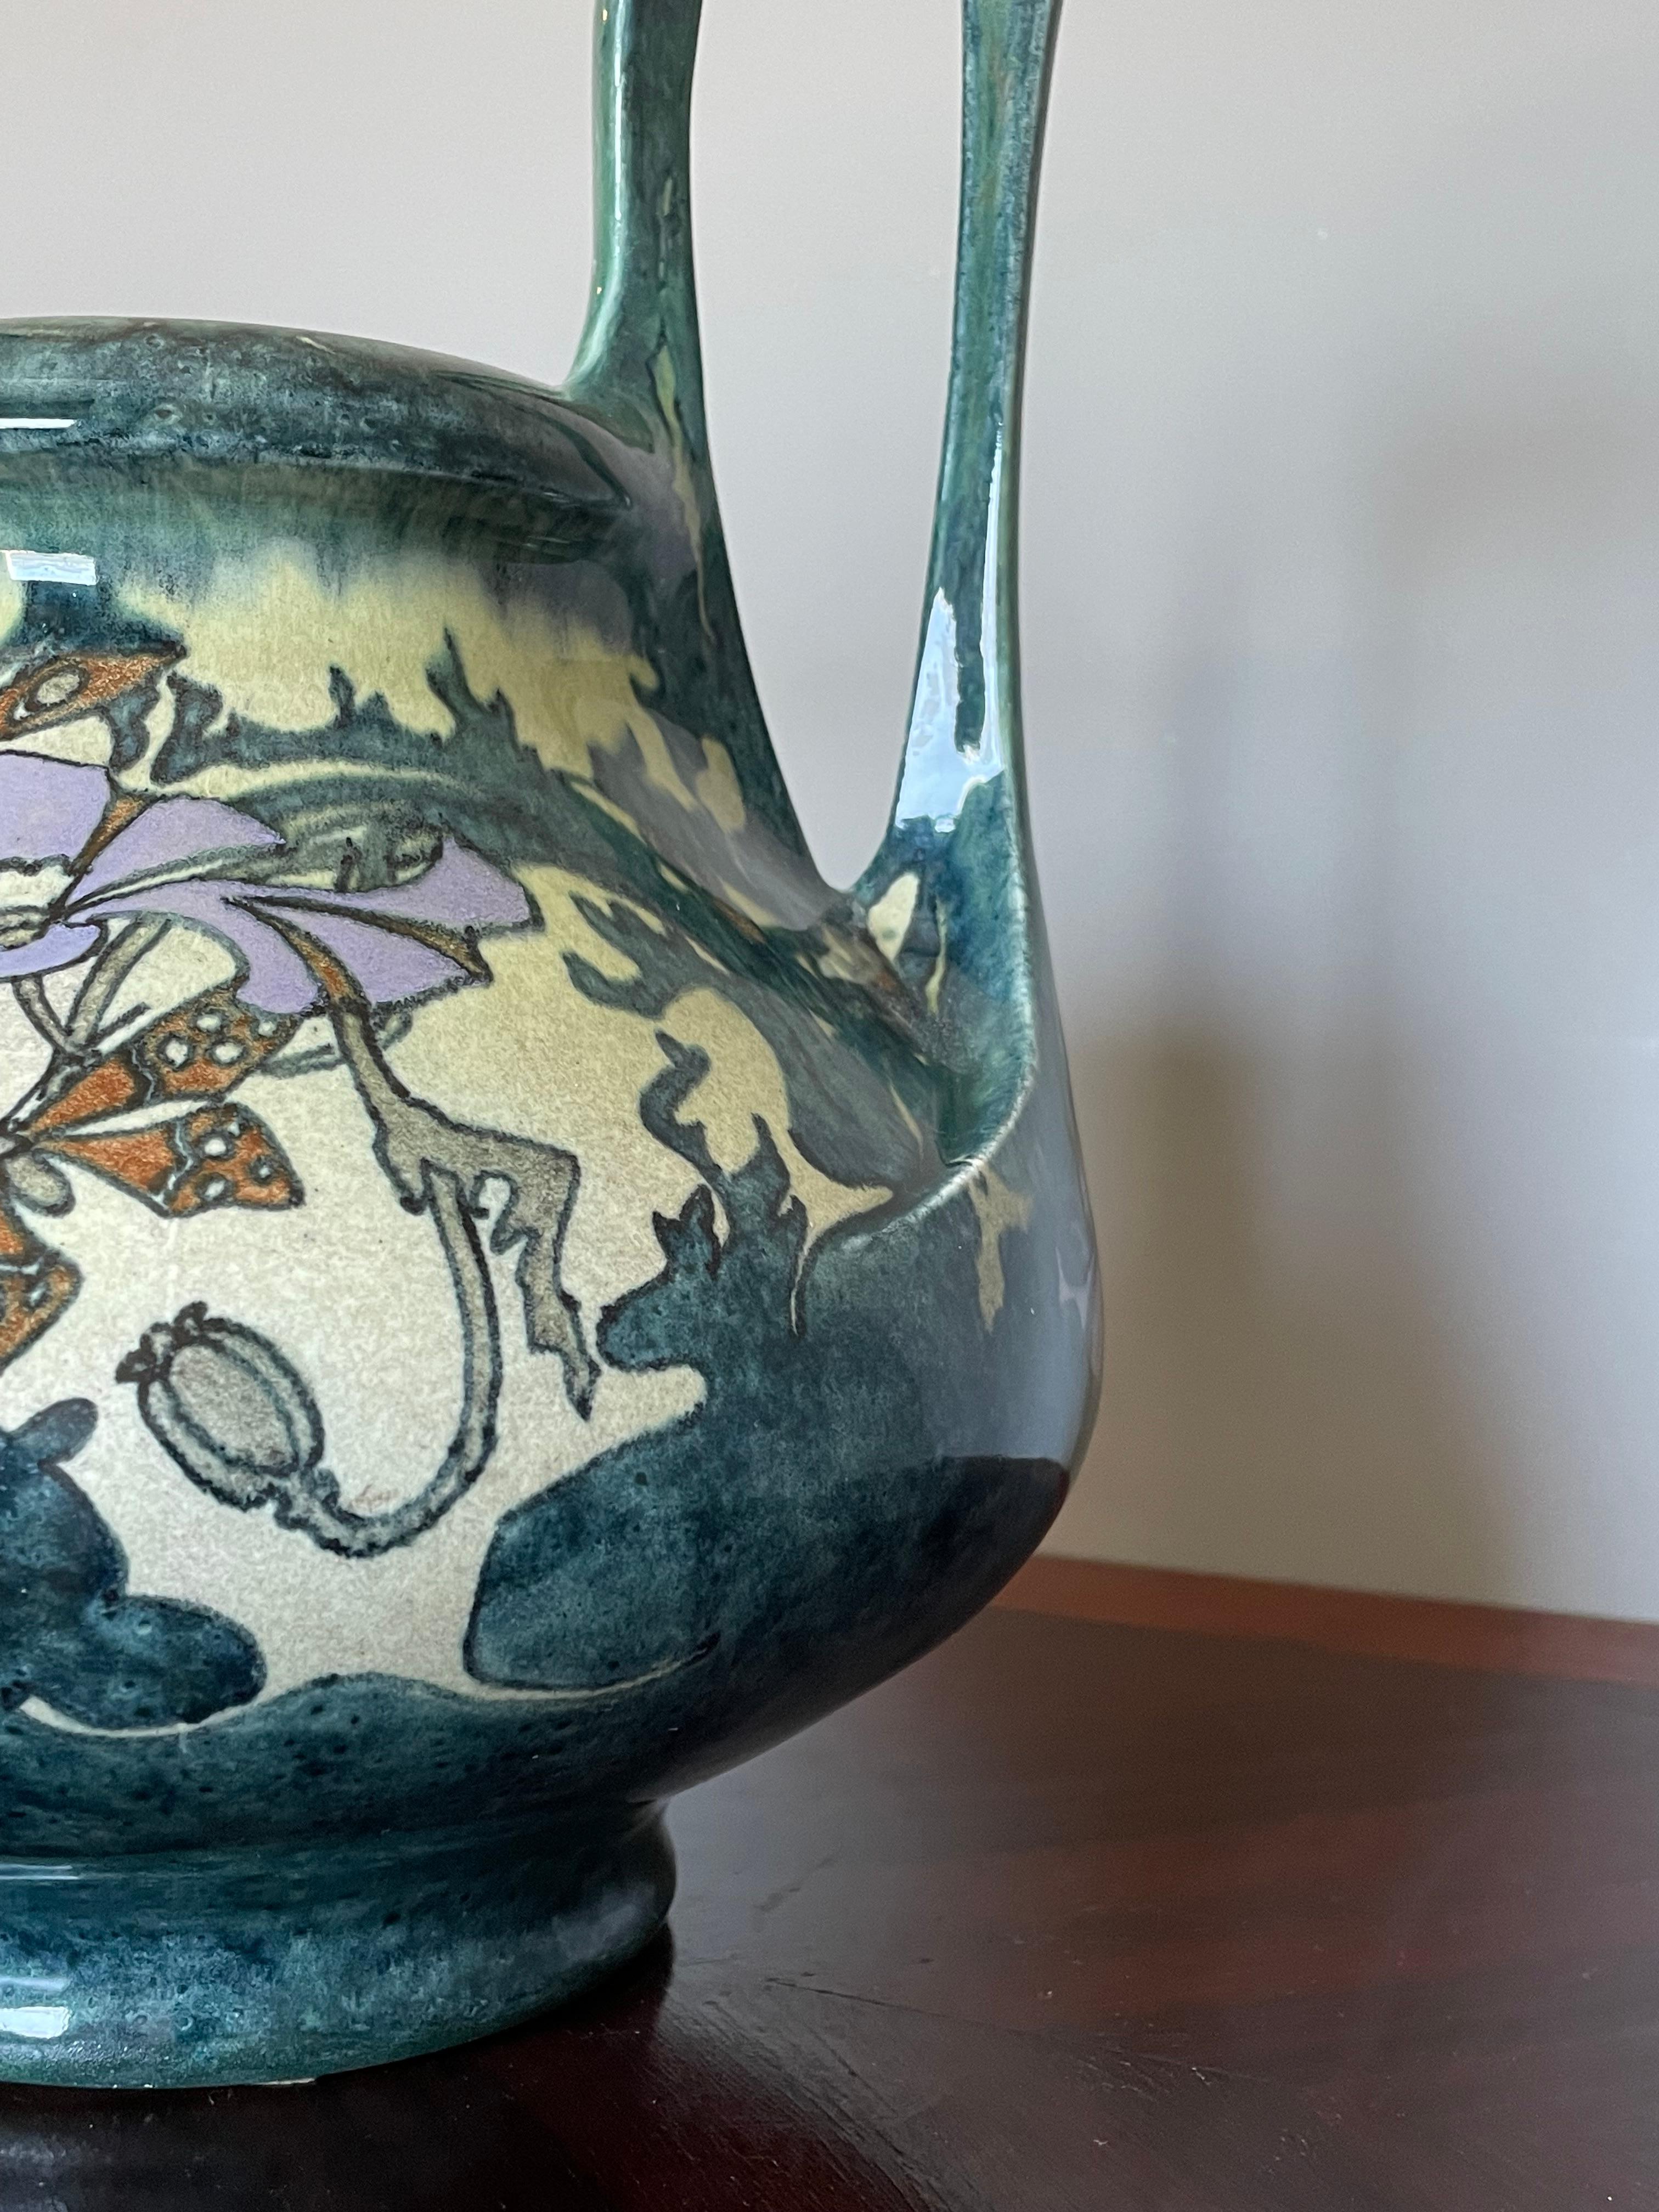 Ceramic Stunning Dutch Arts and Crafts Hand Painted W. Butterflies Vase by J. Mijnlieff For Sale